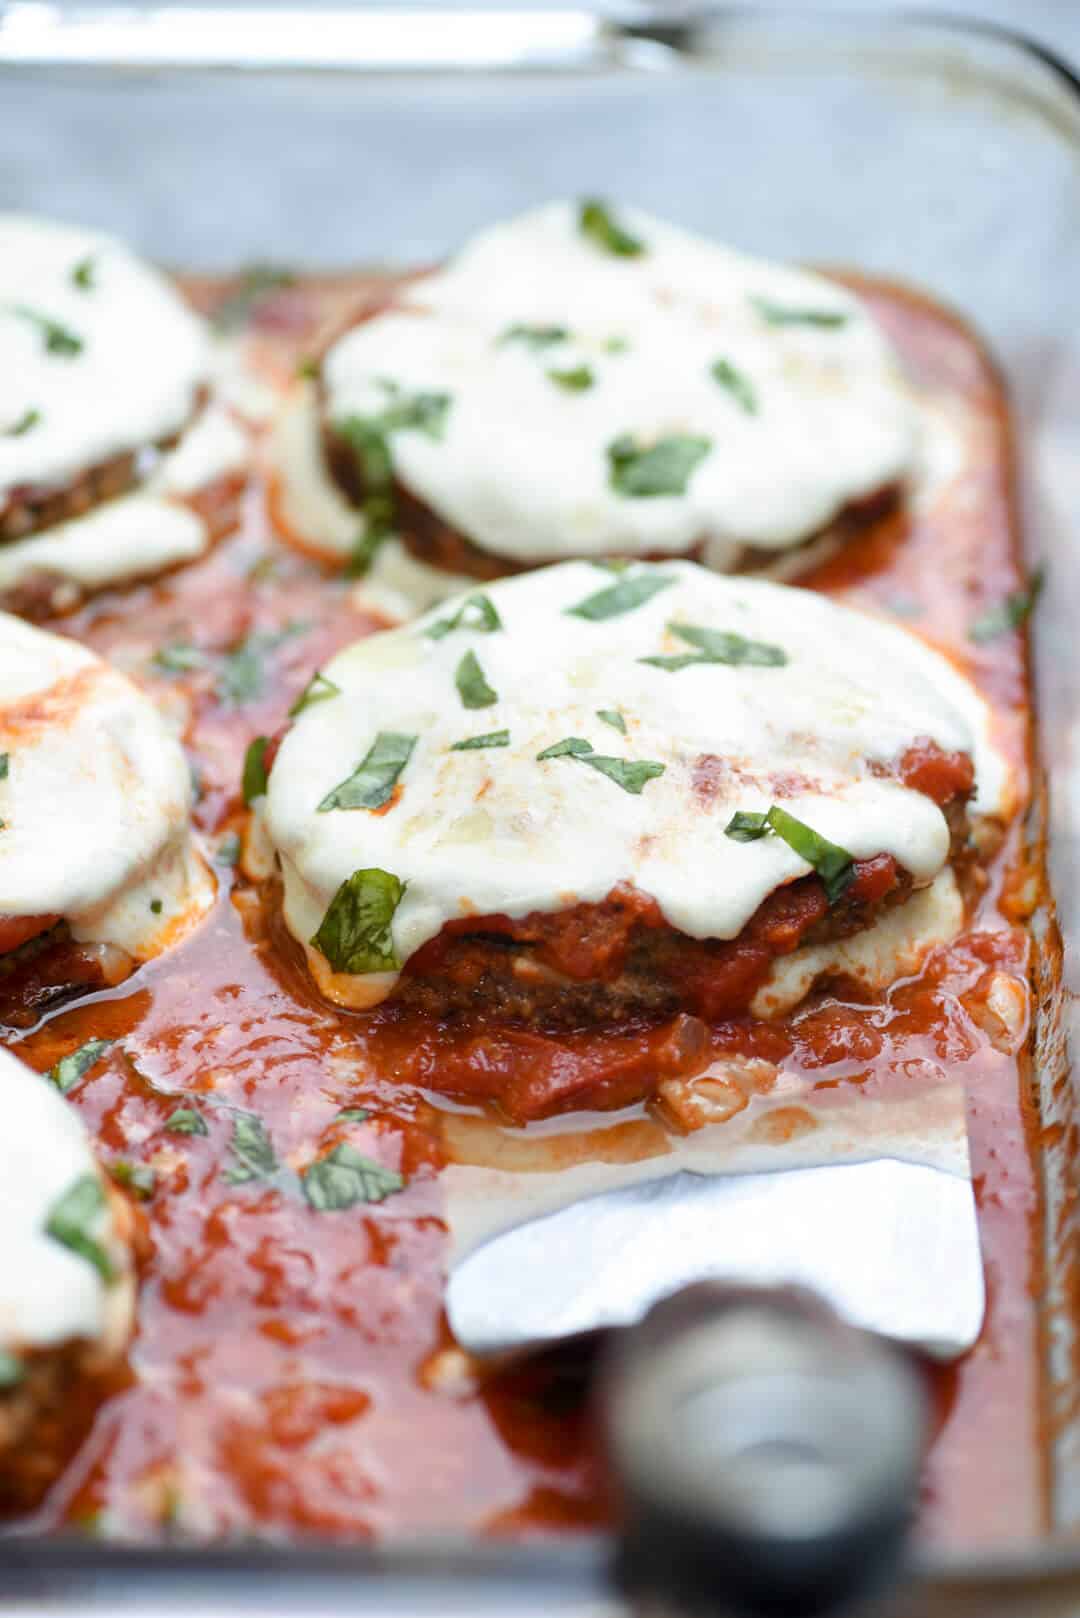 A close up image of Baked Eggplant Parmesan in a baking dish.